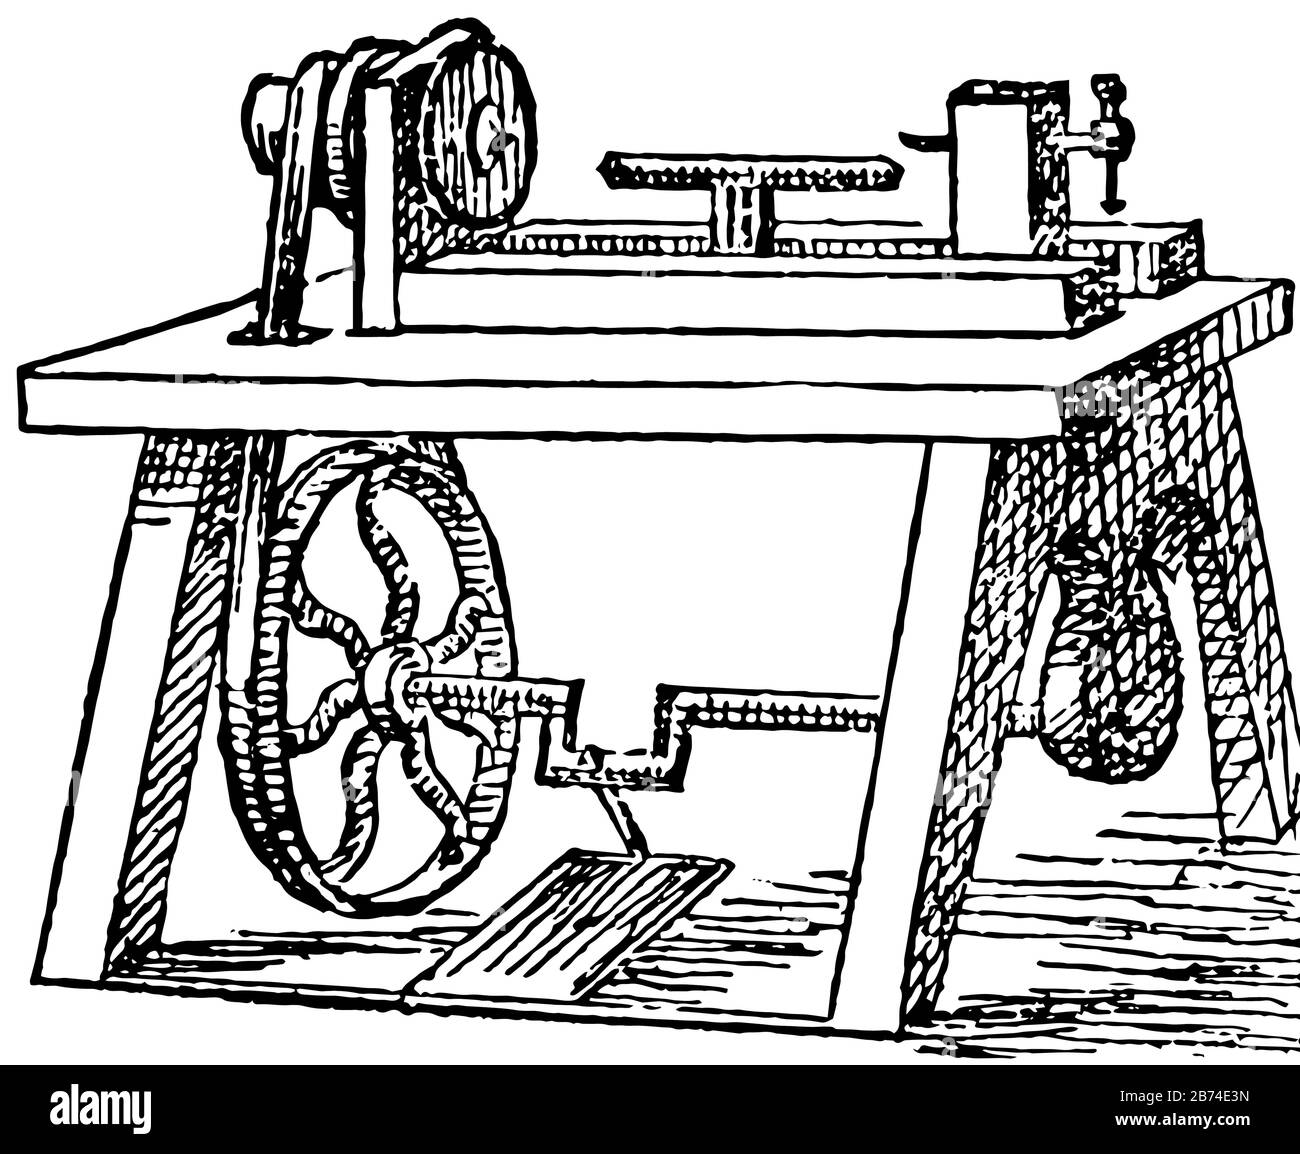 This illustration represents Lathe which is a machine tool for turning or shaping articles of wood or metal, vintage line drawing or engraving illustr Stock Vector